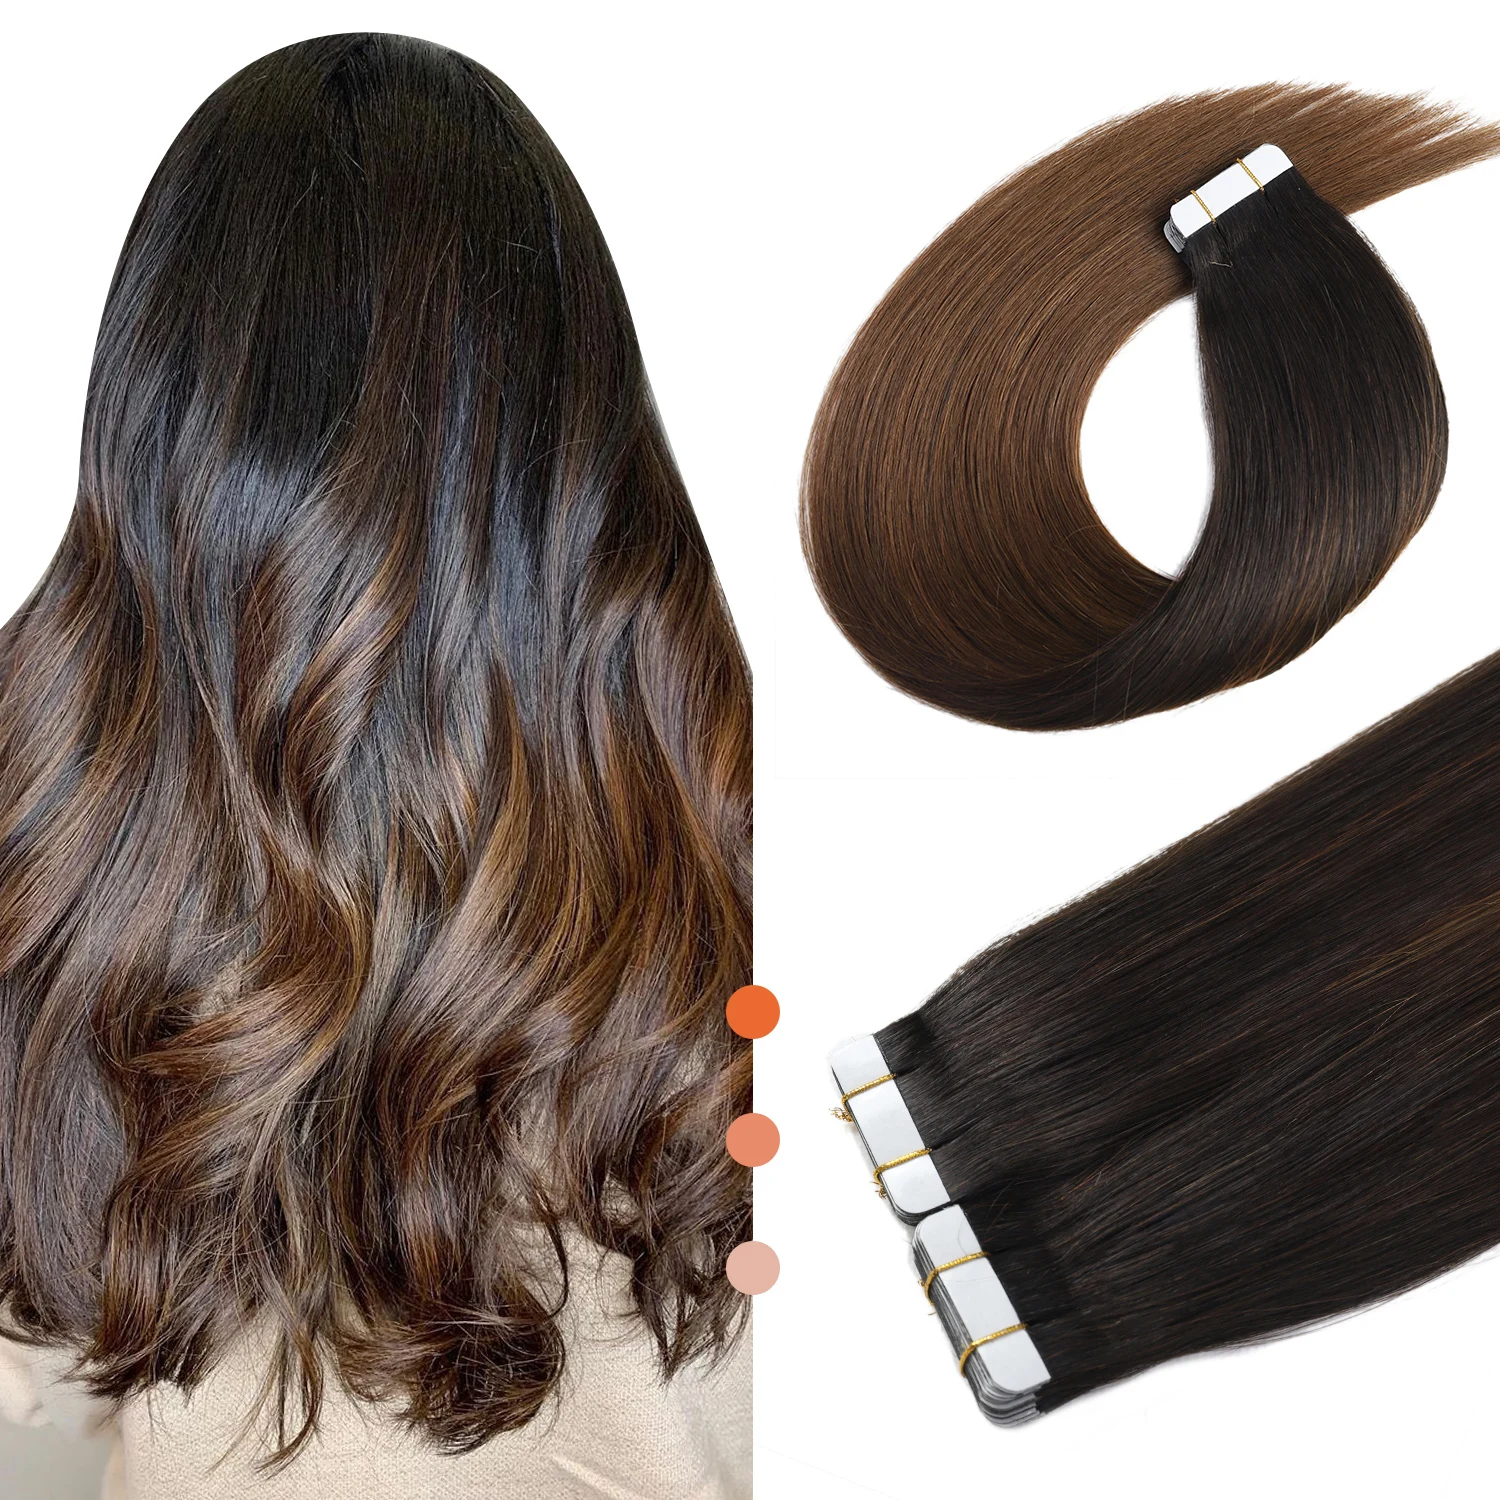 

XDhair Tape In Hair Extensions Human Hair 14"22" 50g Balayage Ombre Black to Brown Tape In Hair Extensions